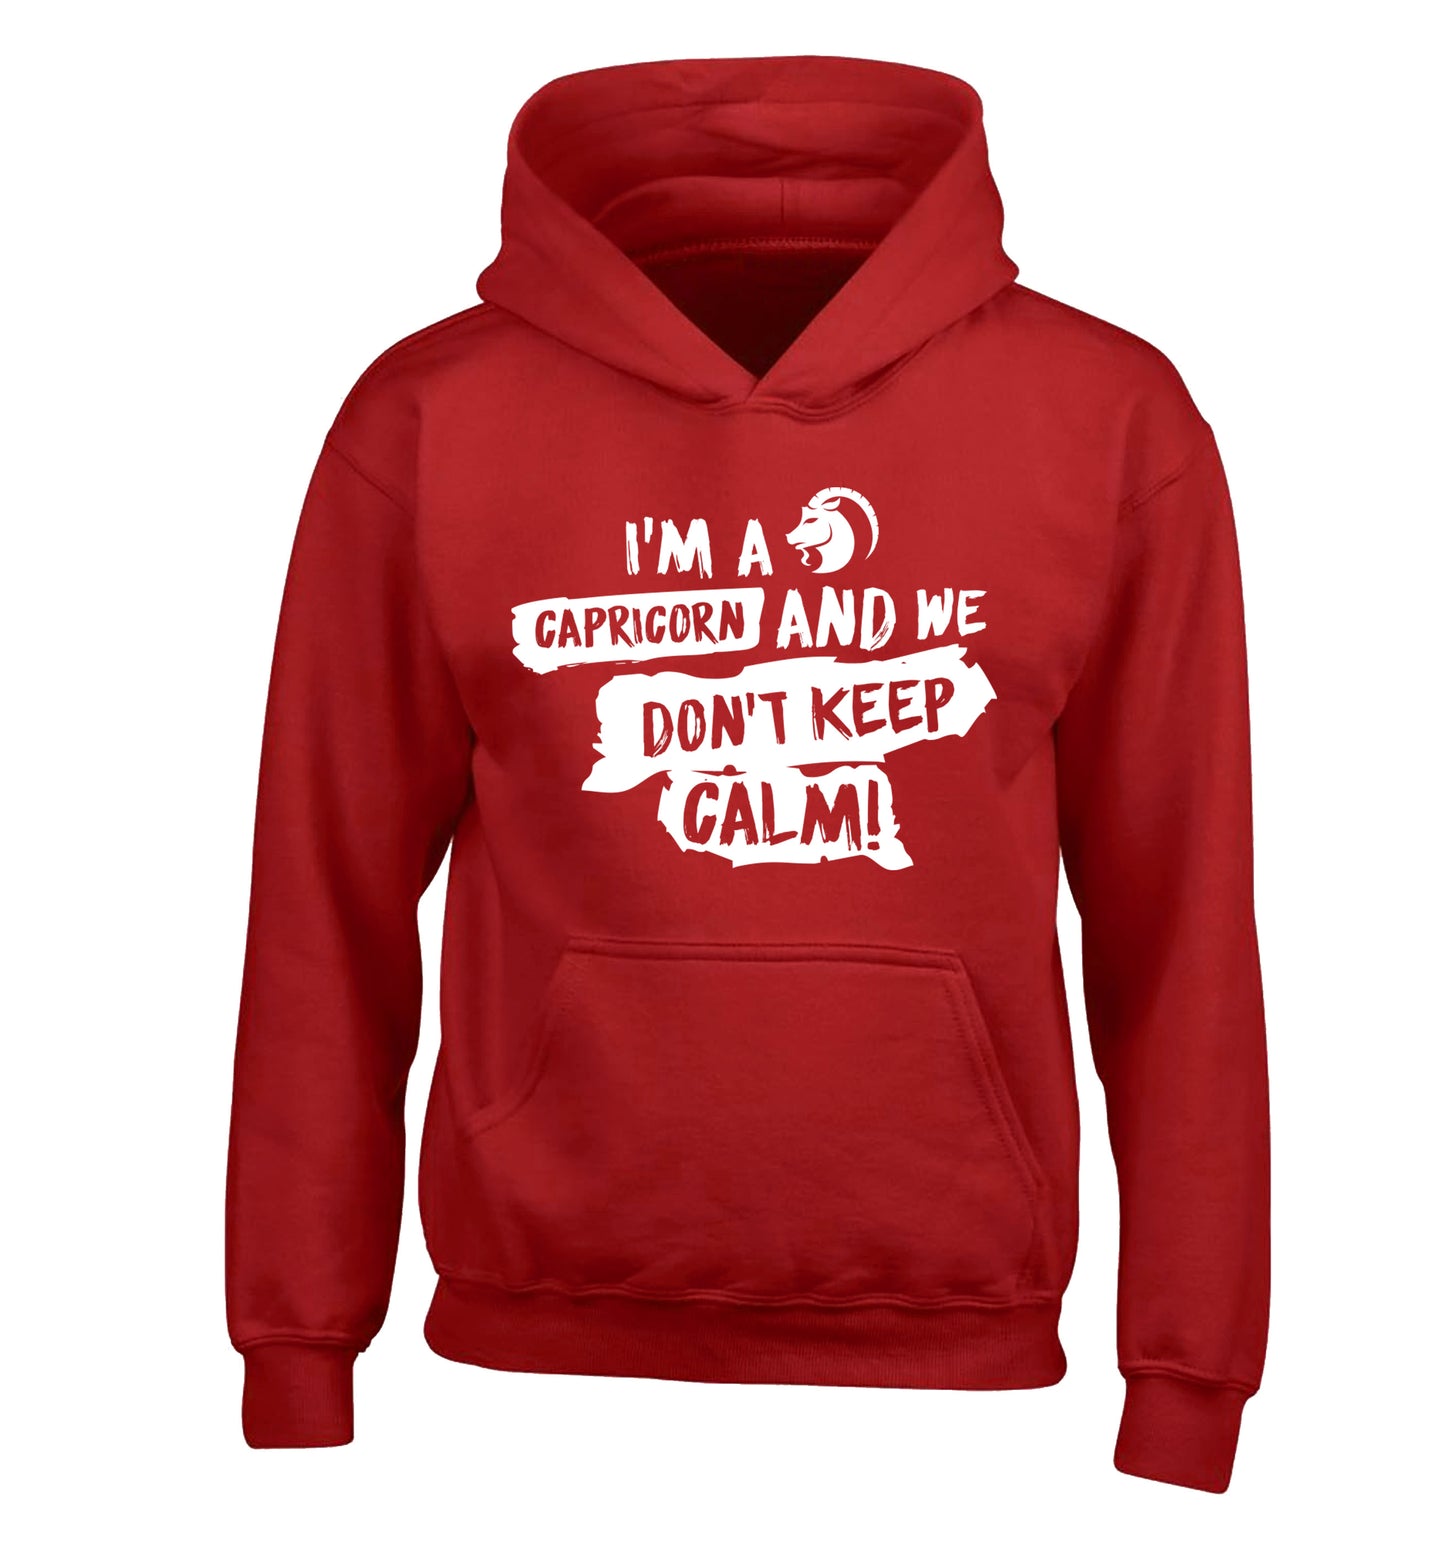 I'm a capricorn and we don't keep calm children's red hoodie 12-13 Years